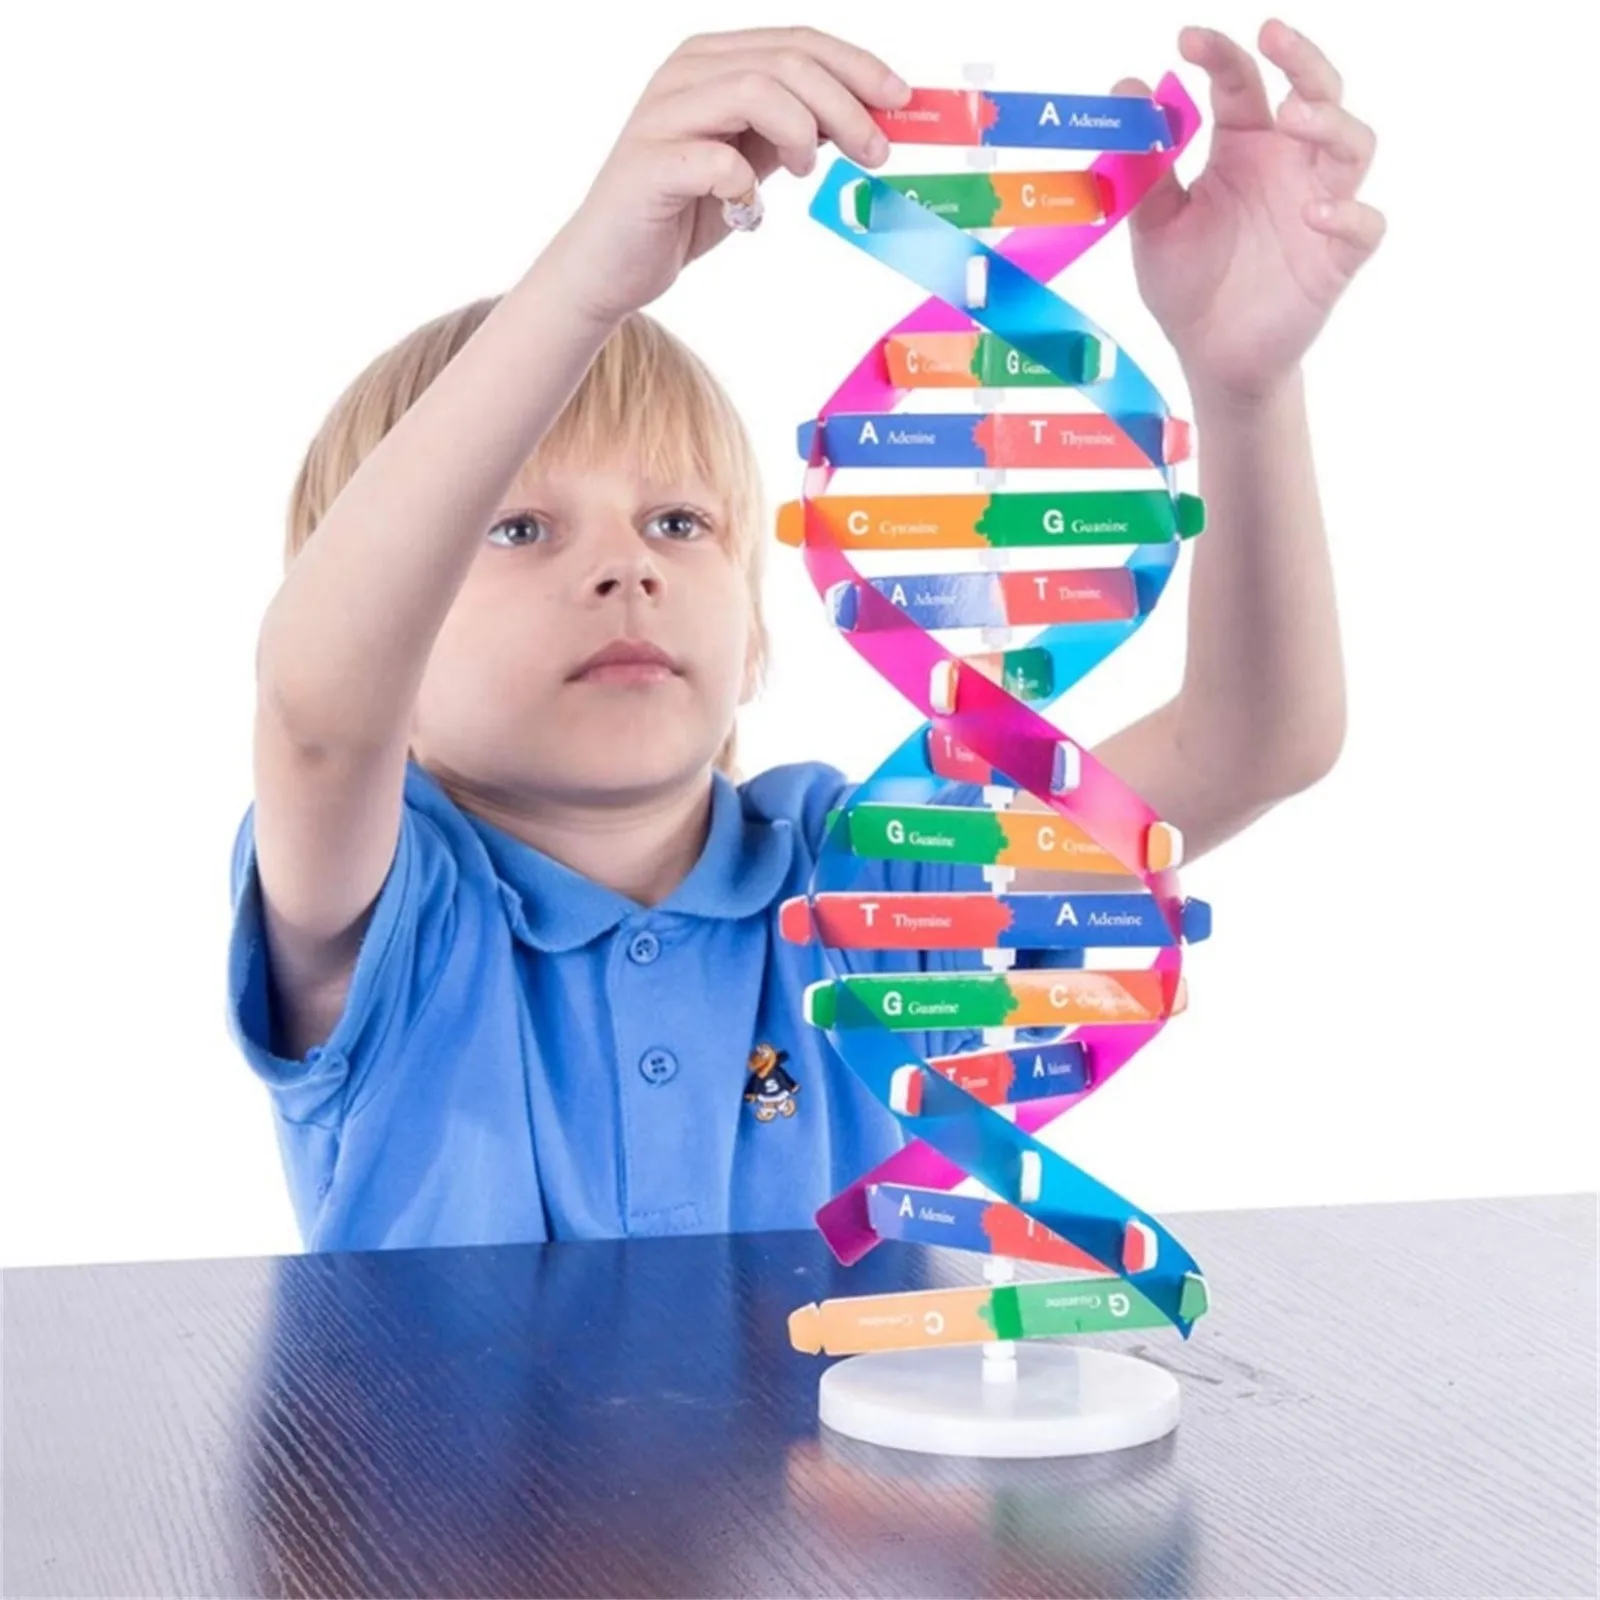 

Hot！Preschool Educational Puzzle Learning Toy Biological Science Kits 3D DIY Human DNA Model Genetic Structure Children Gift